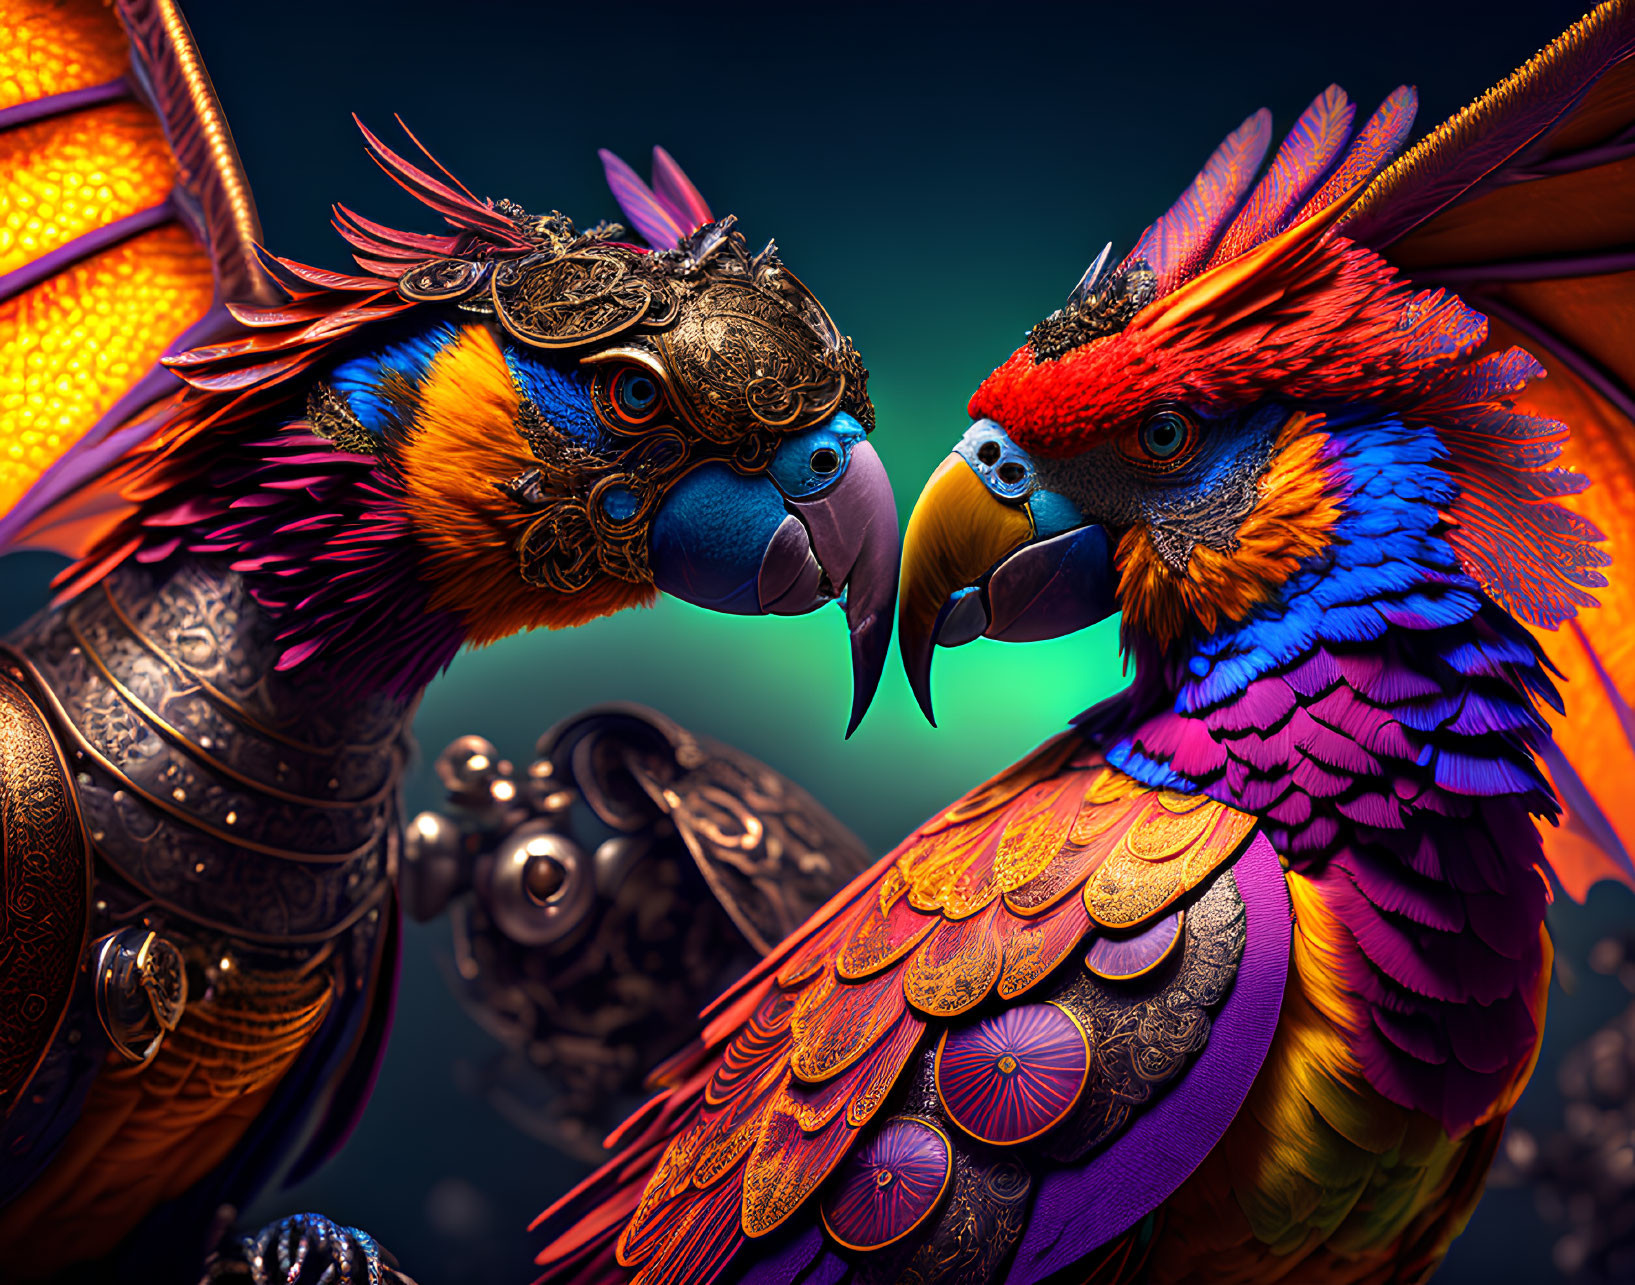 Vividly Colored Mechanical Parrots in Armor Face Off on Dark Background